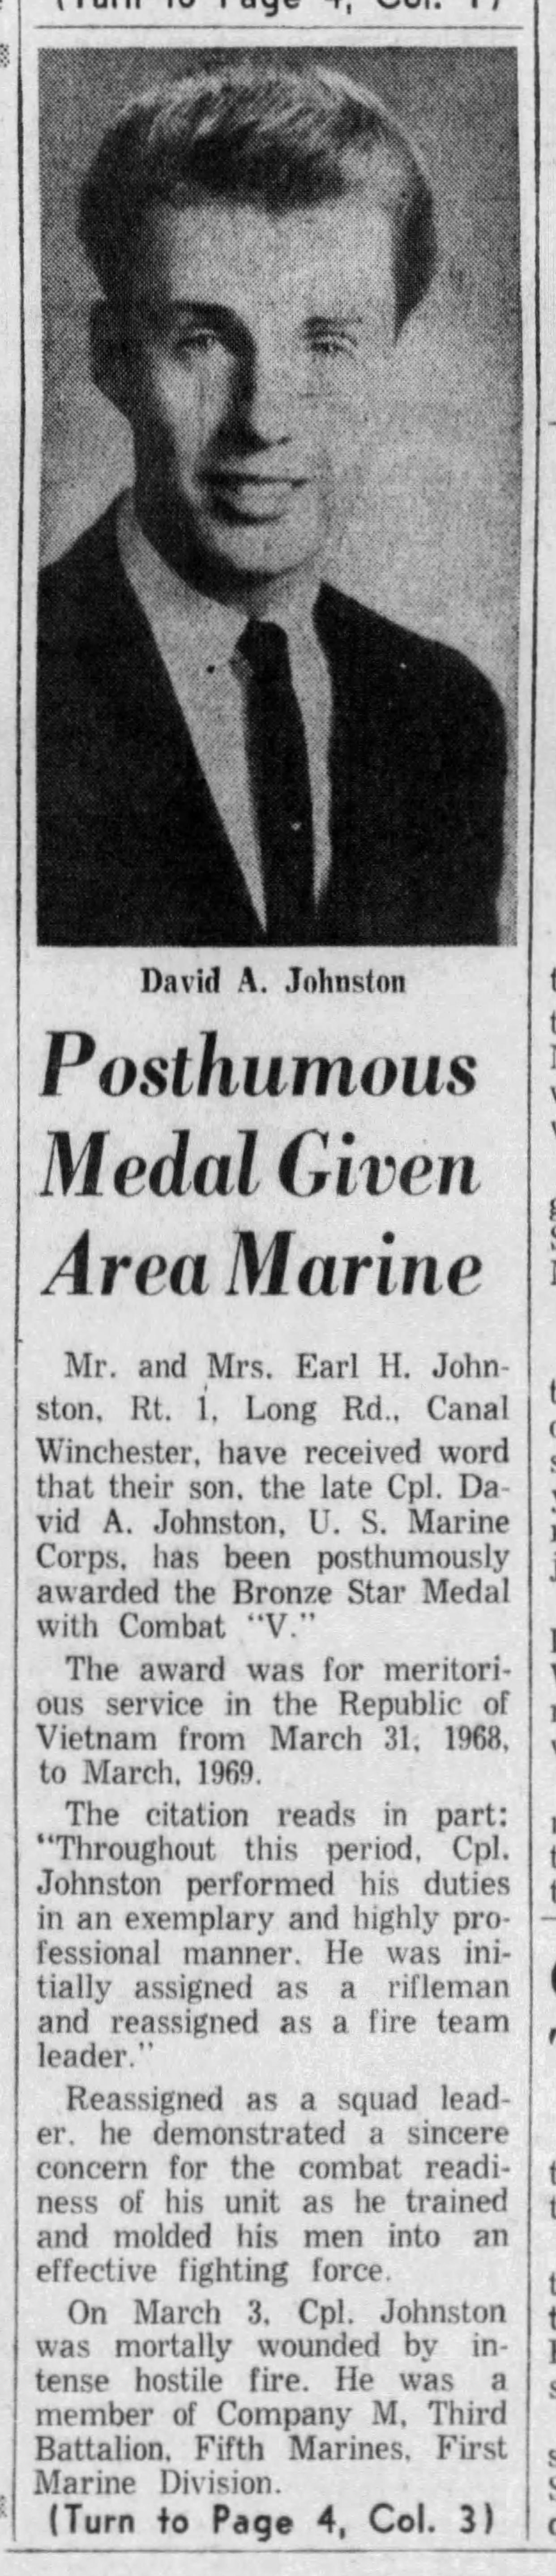 A clipping from the Oct. 16, 1969 Lancaster Eagle-Gazette